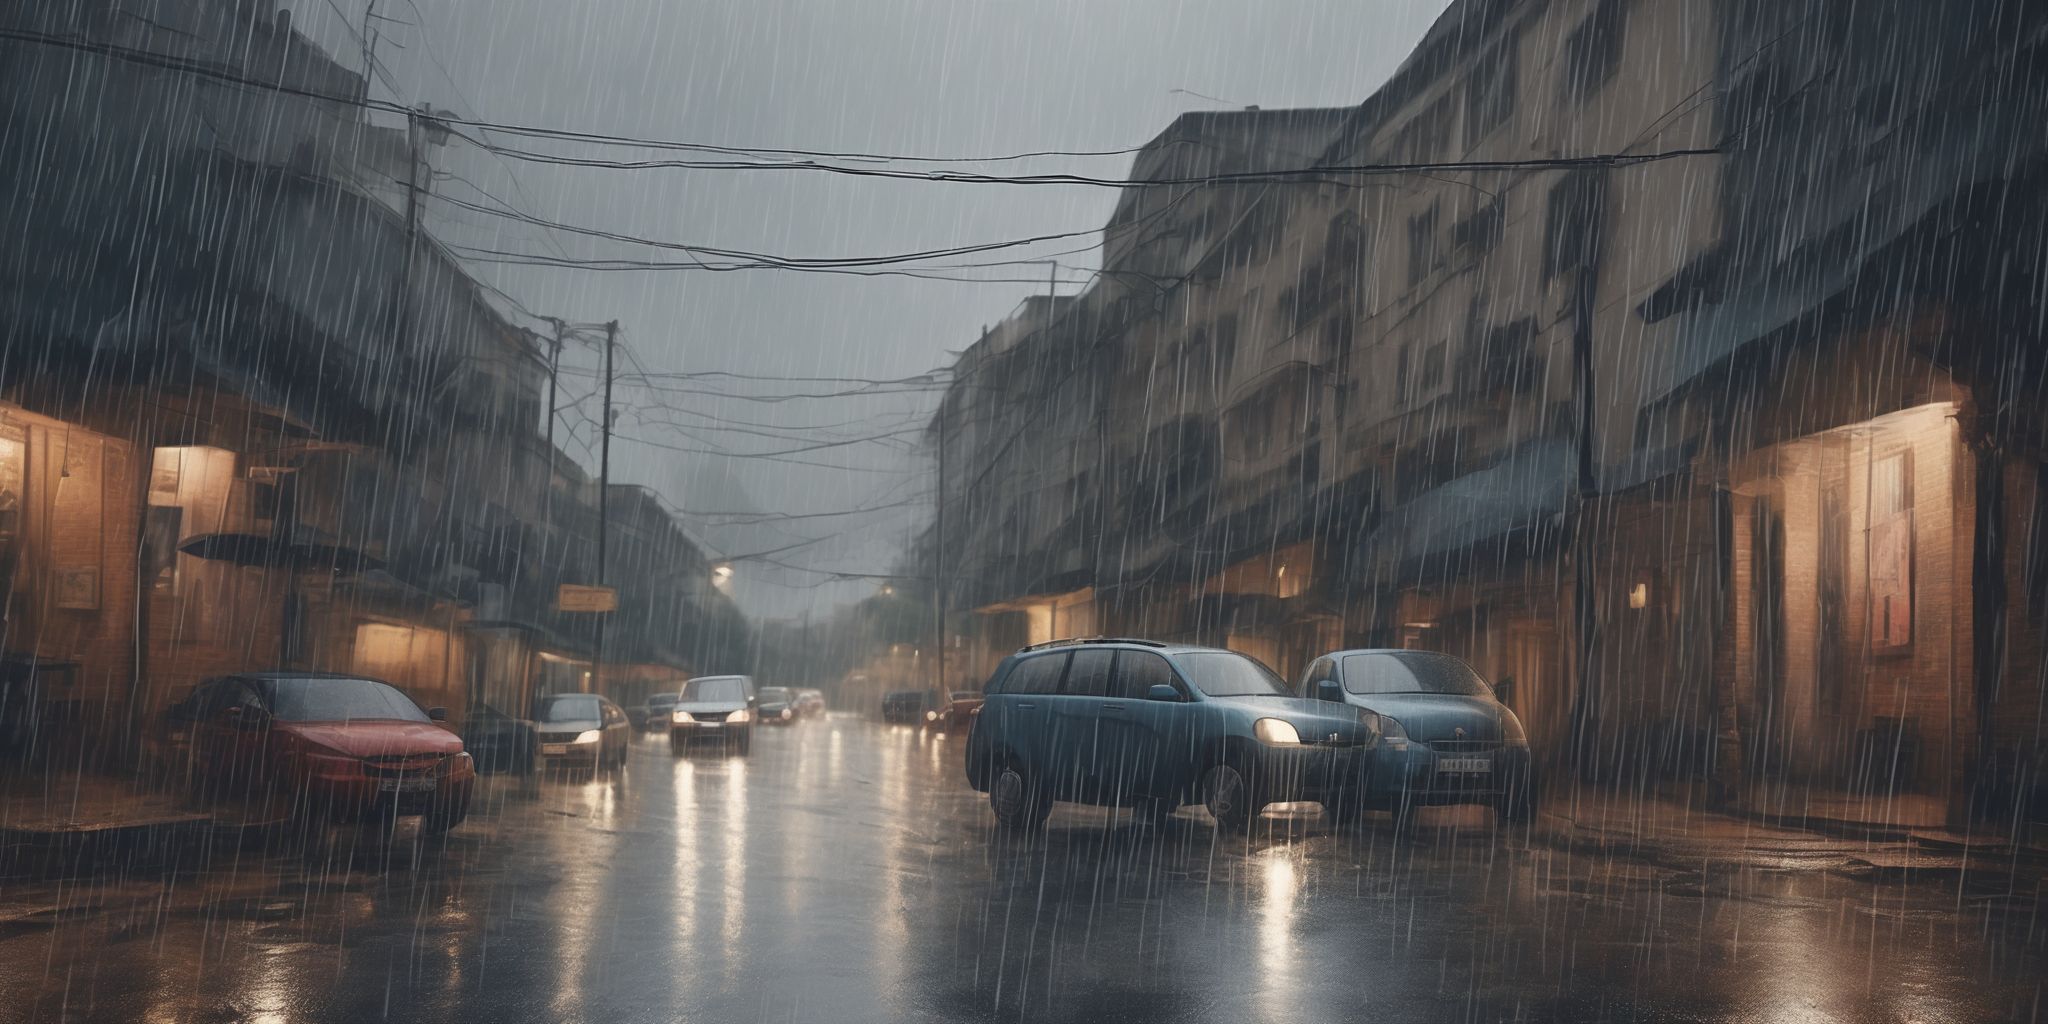 Rainy day  in realistic, photographic style